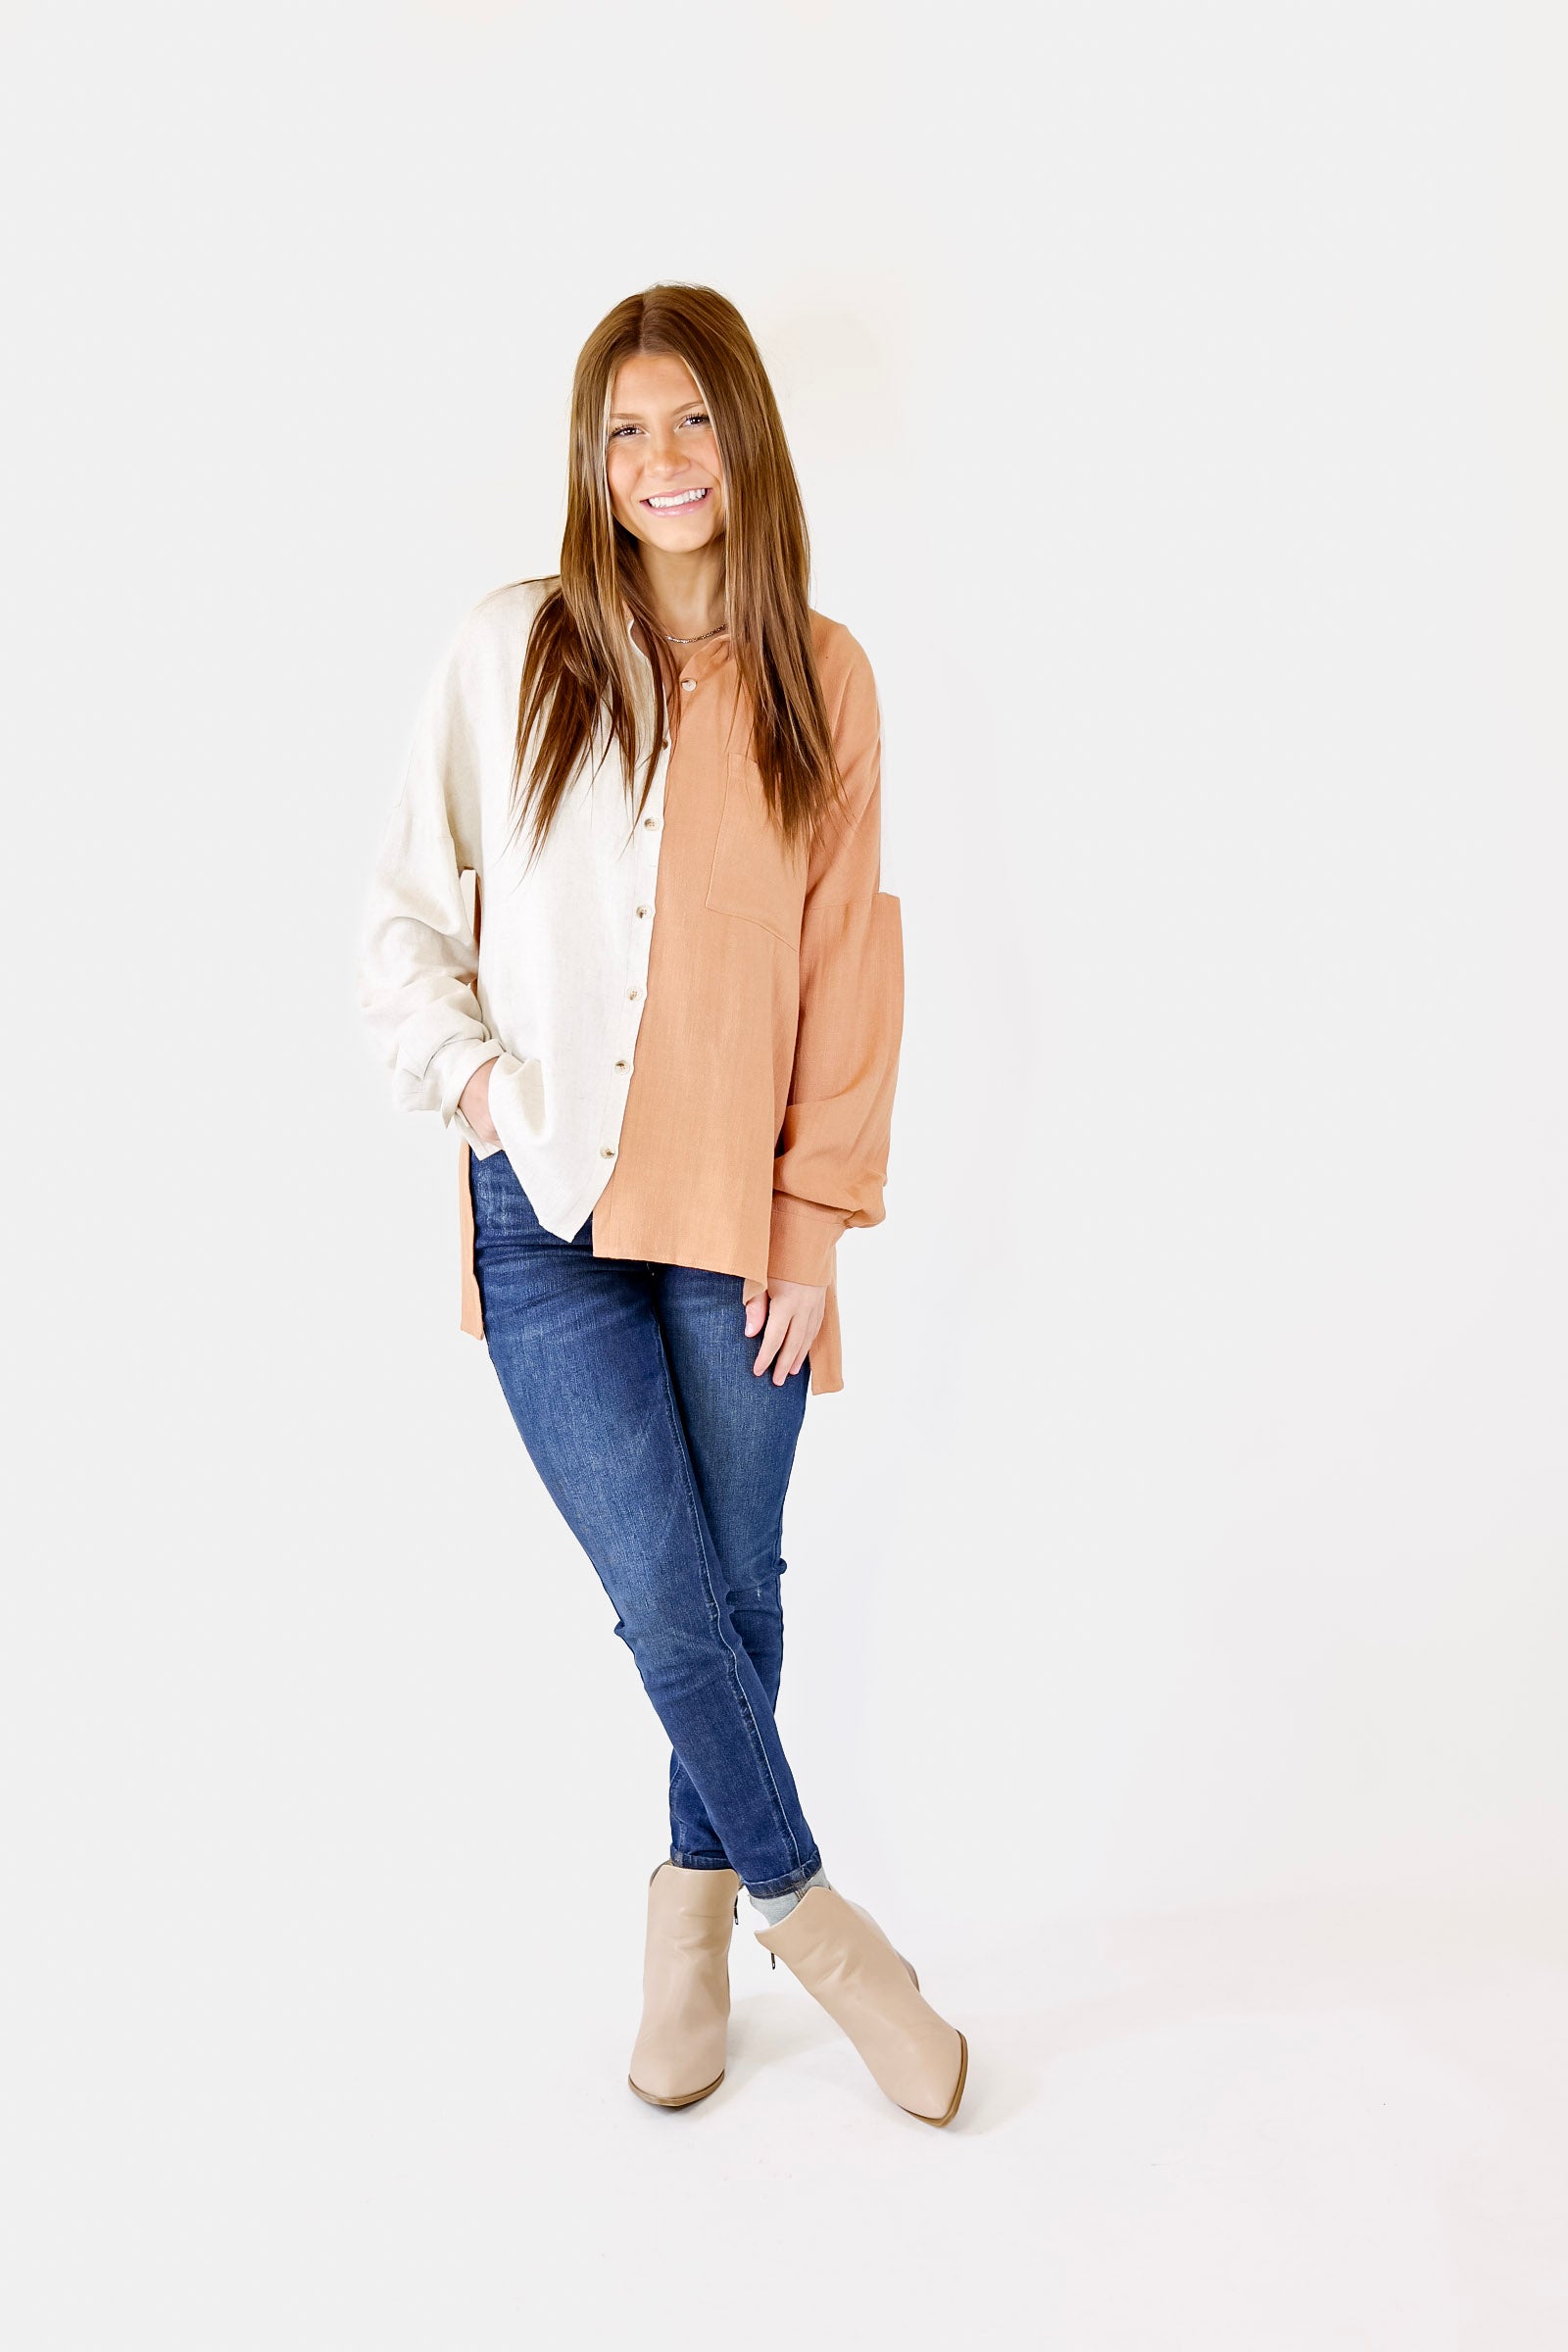 Follow Me Long Sleeve Button Up Color Block Top in Terracotta - Giddy Up Glamour Boutique